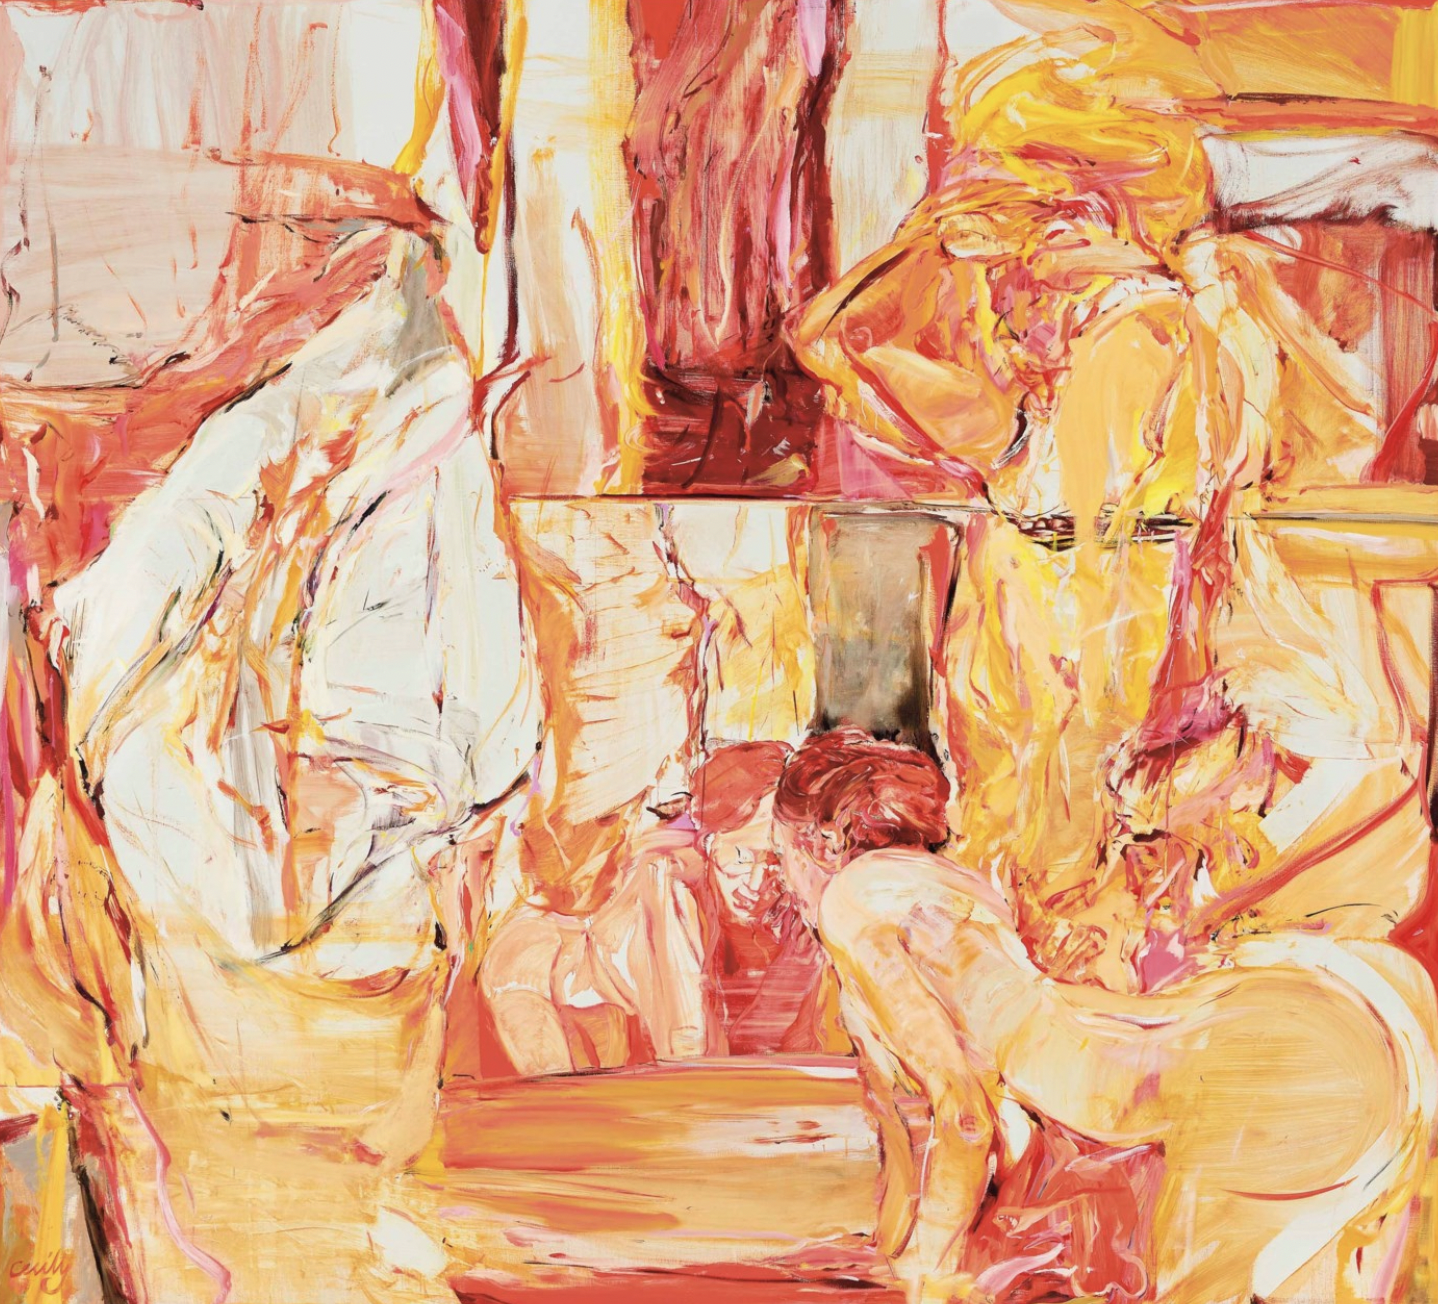 Cecily Brown's Girl Trouble